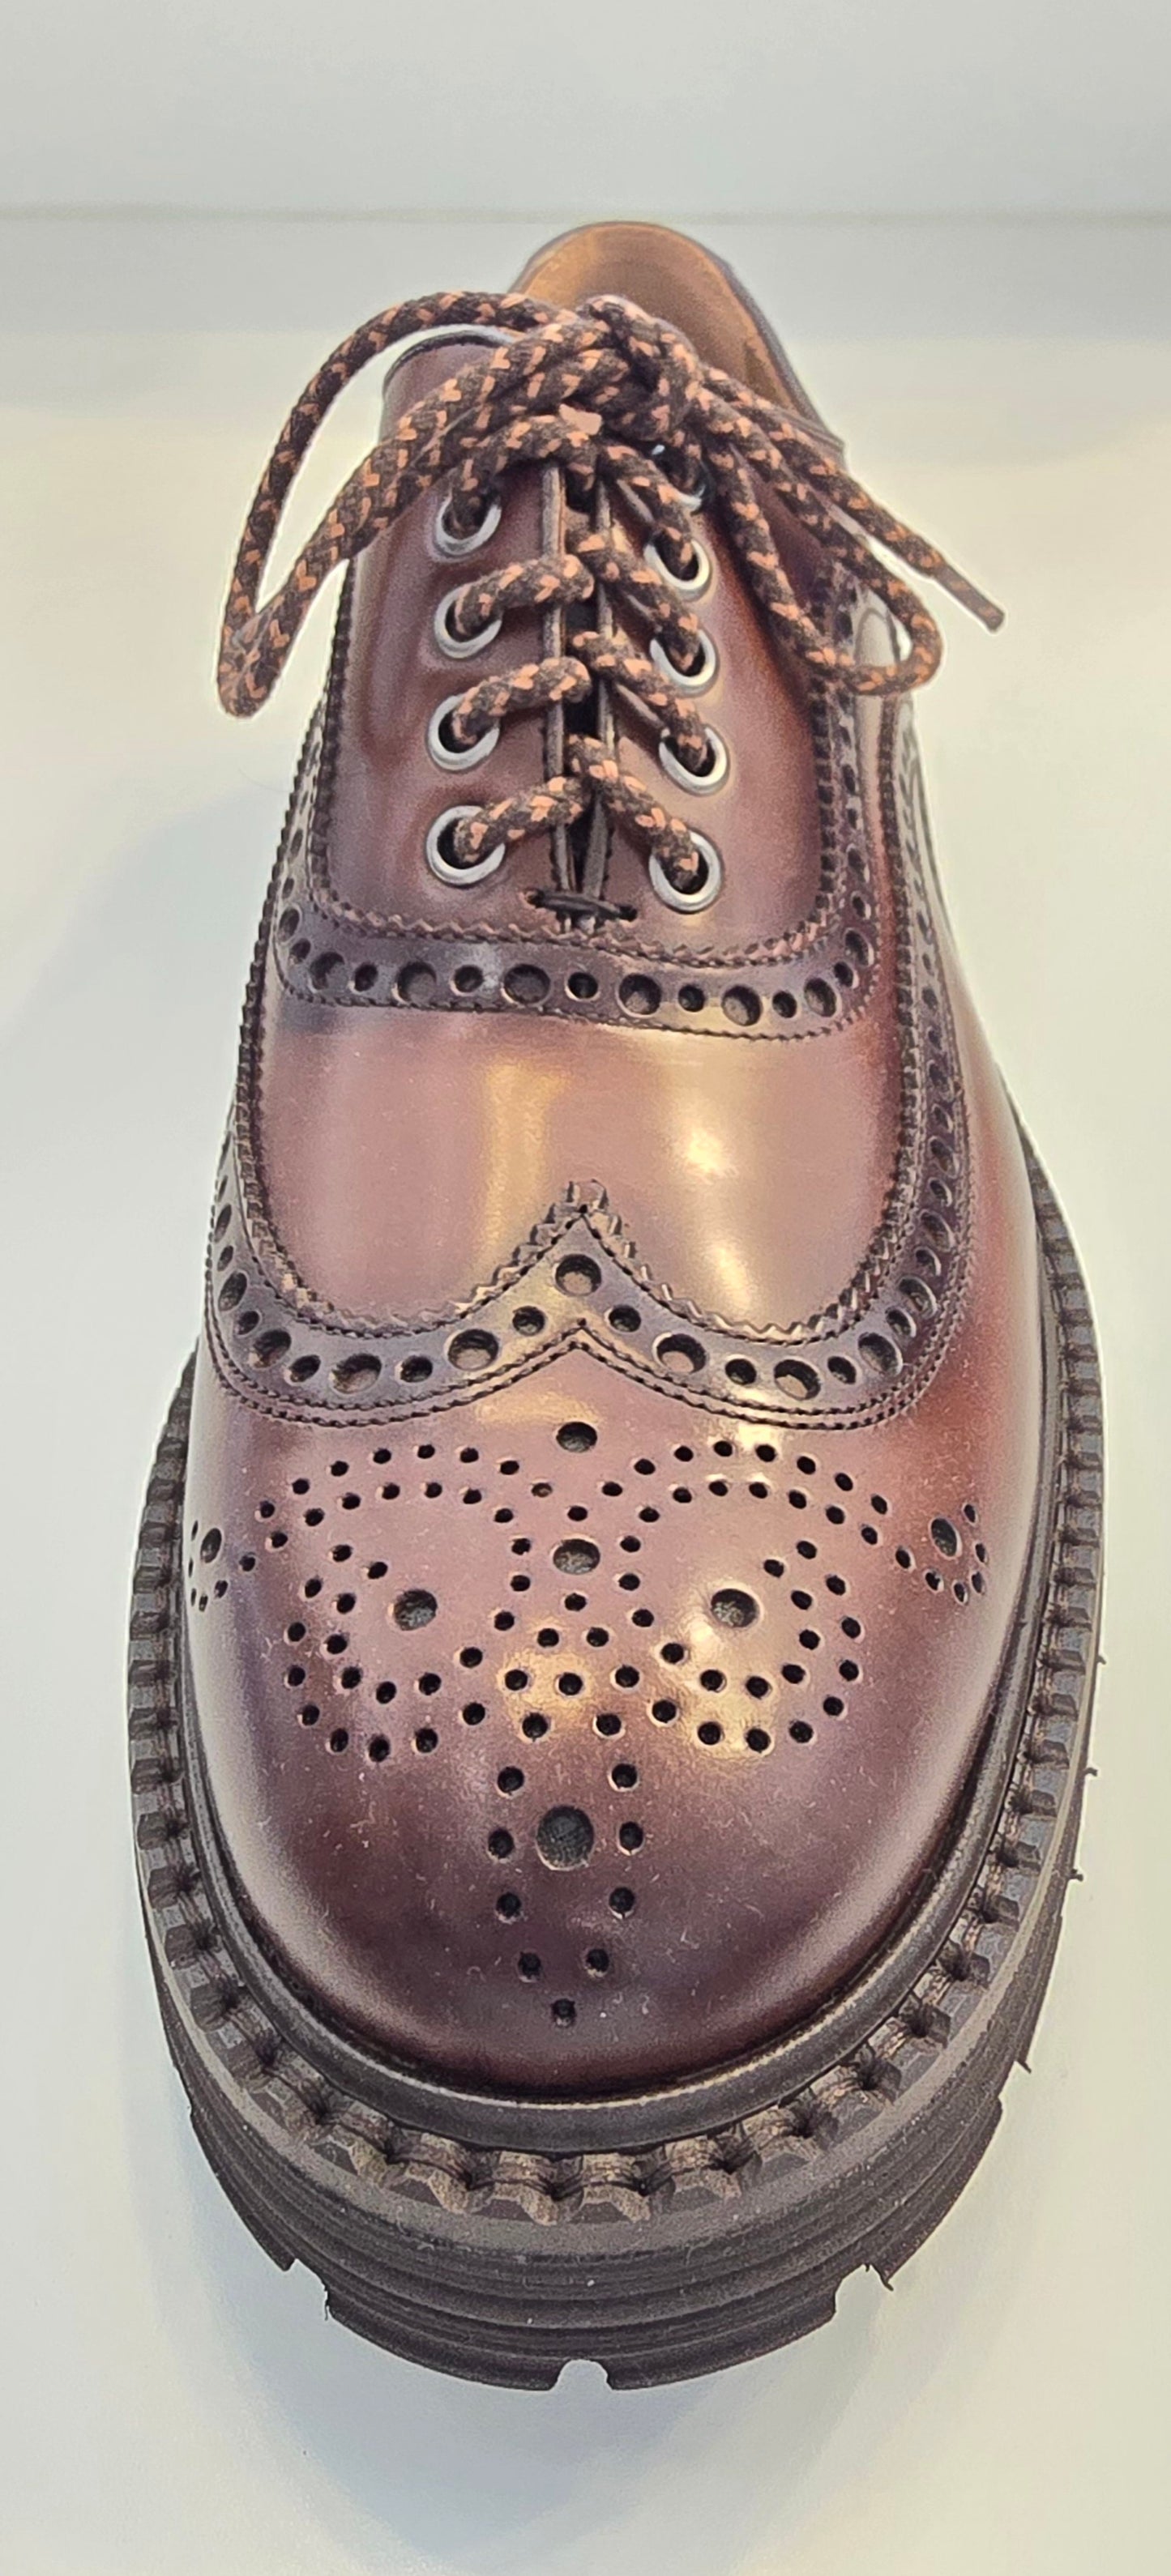 Calce Leather Shoes - Oxford Brogue Nappa Leather Brown